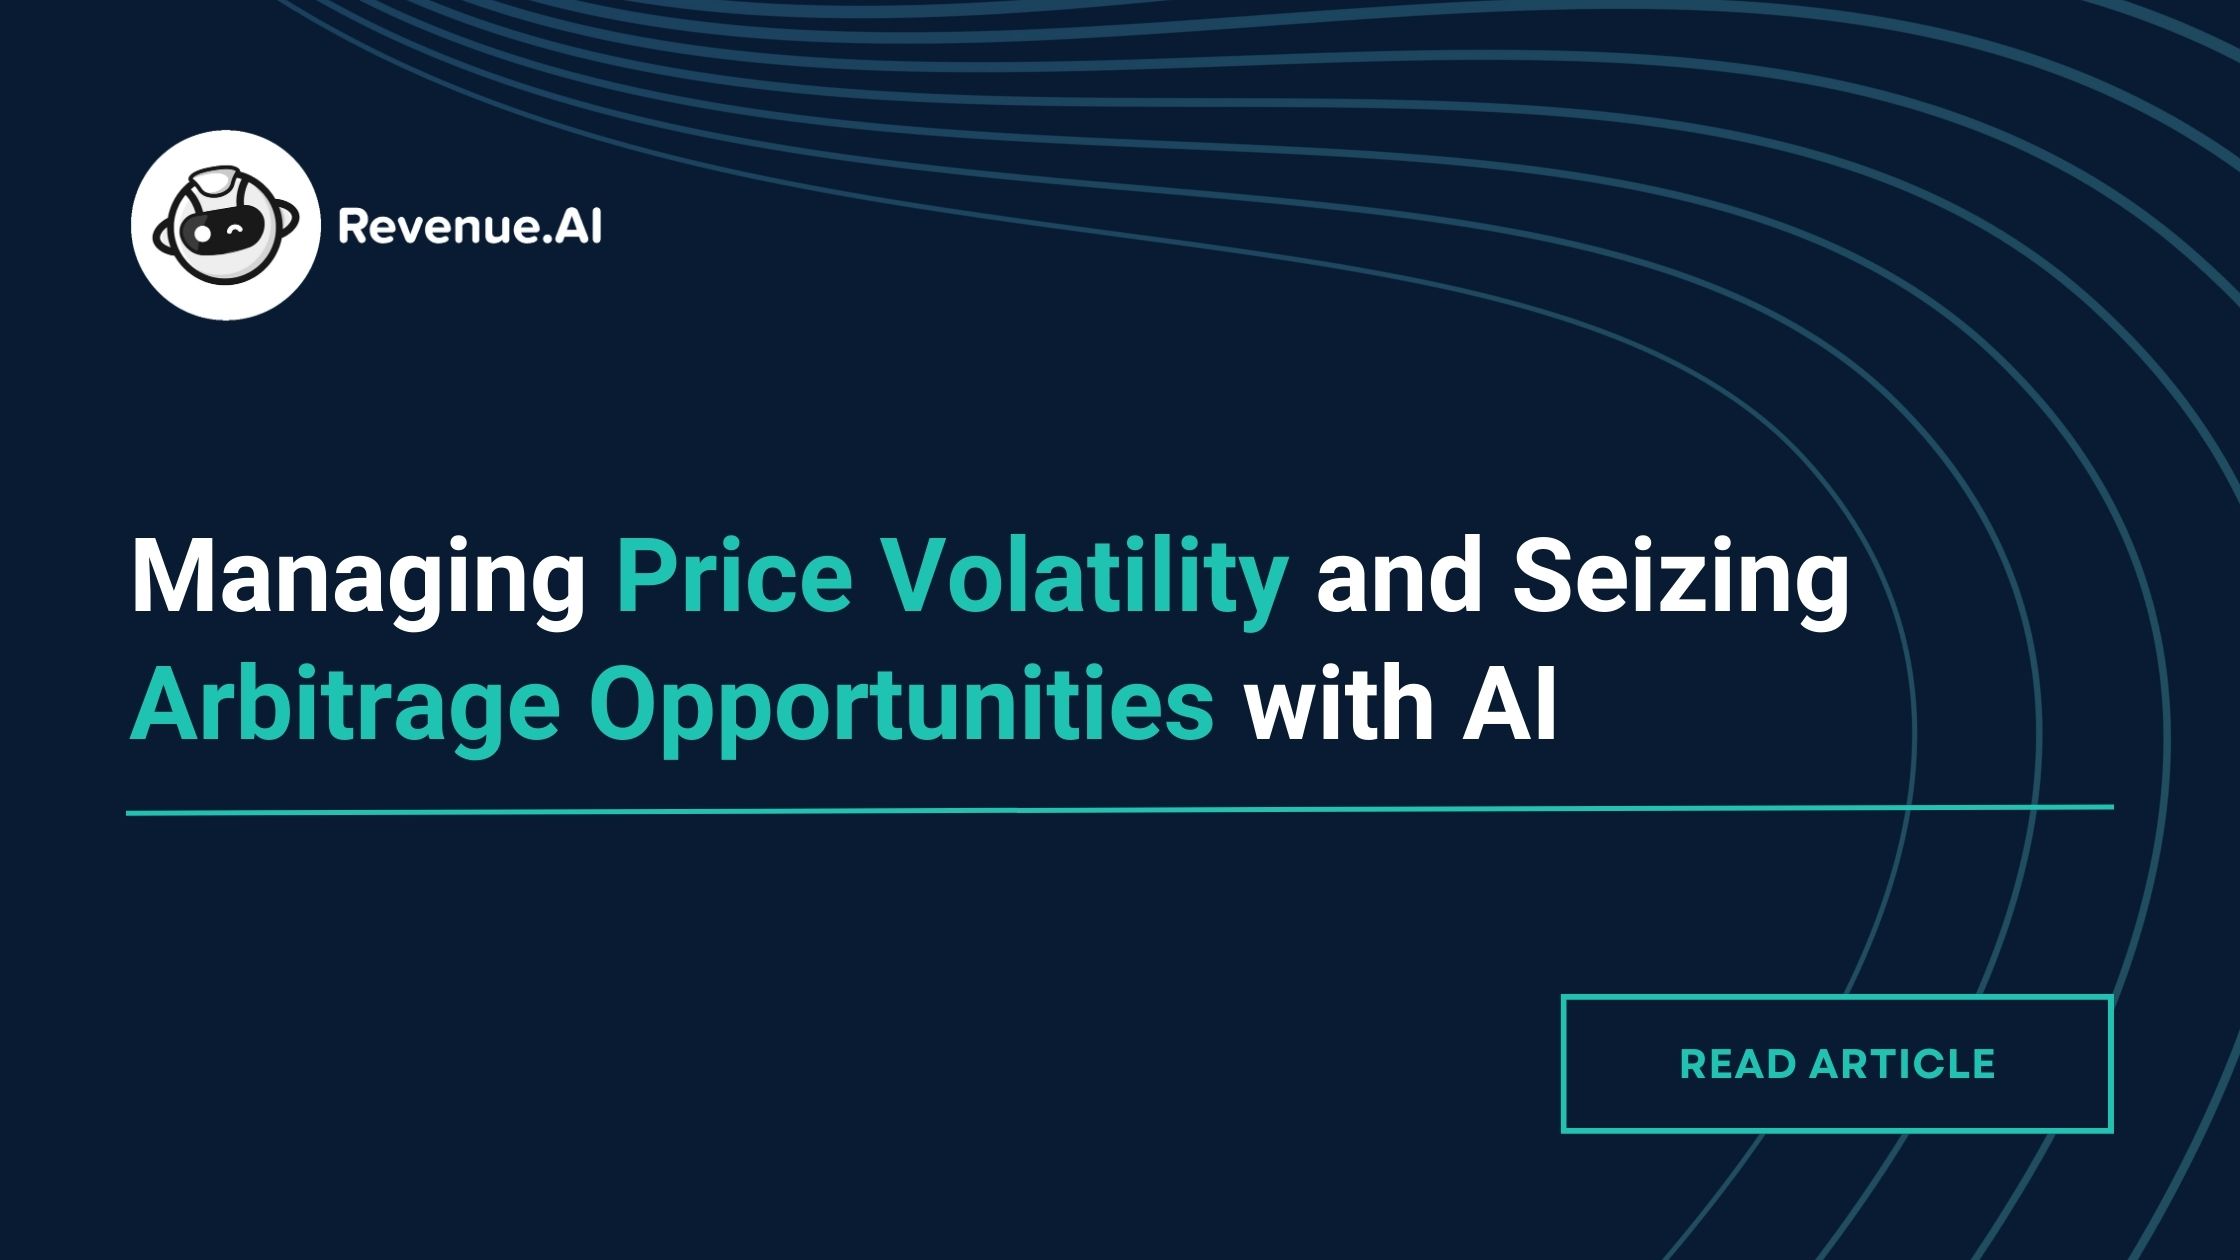 Managing Price Volatility and Seizing Arbitrage Opportunities with AI